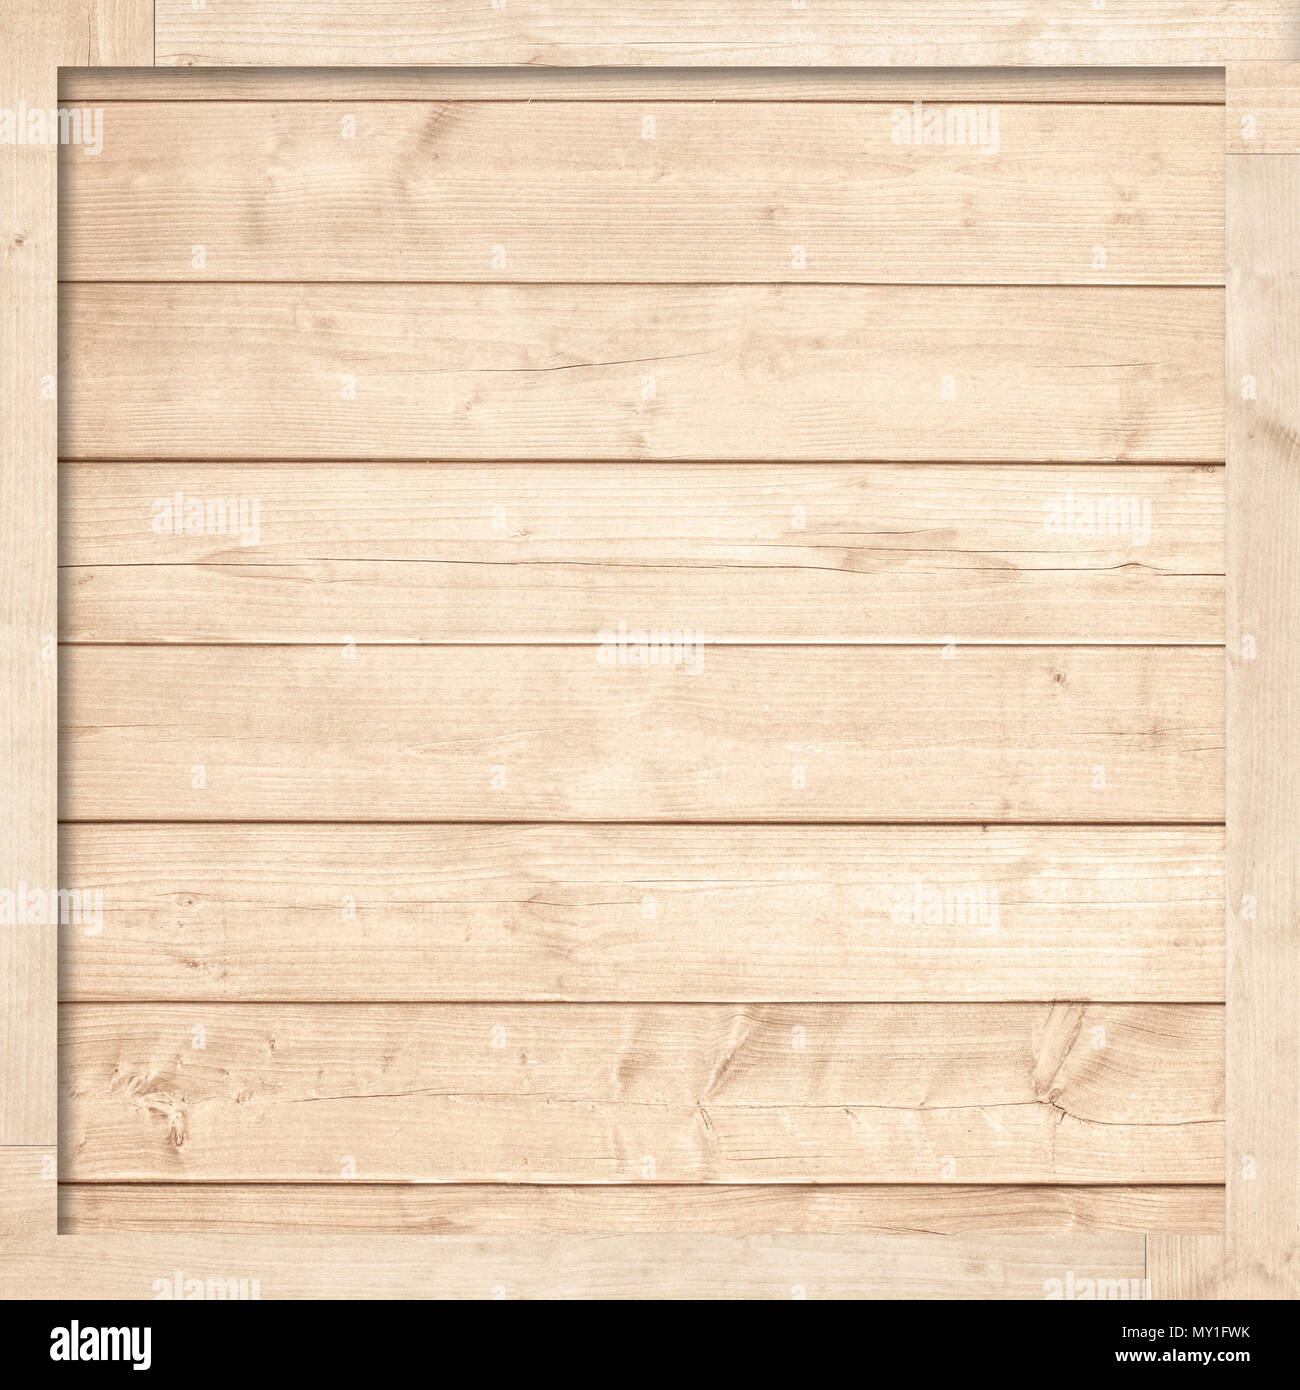 Brown wooden planks texture or background with frame. Stock Photo